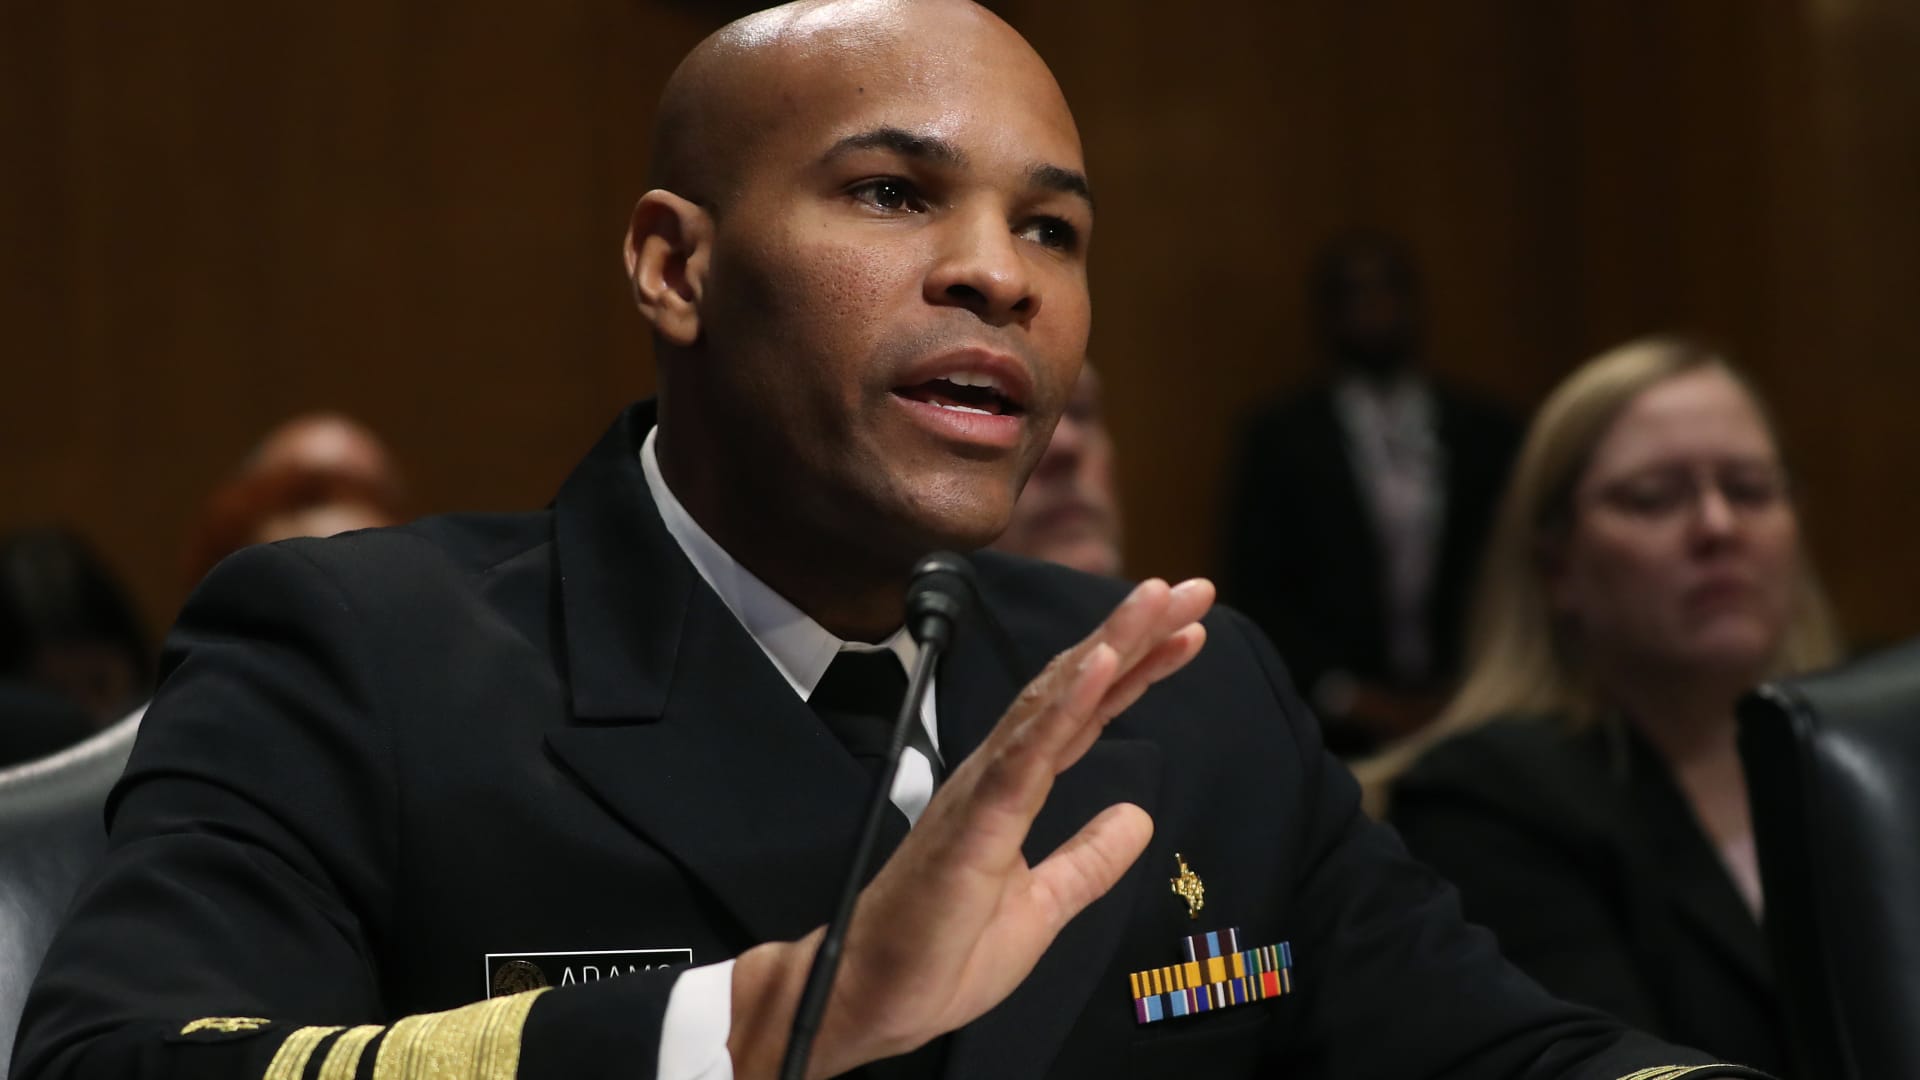 U.S. Surgeon General Jerome Adams testifies during a Senate Finance Committee committee hearing on Capitol Hill, October 24, 2019 in Washington, DC.